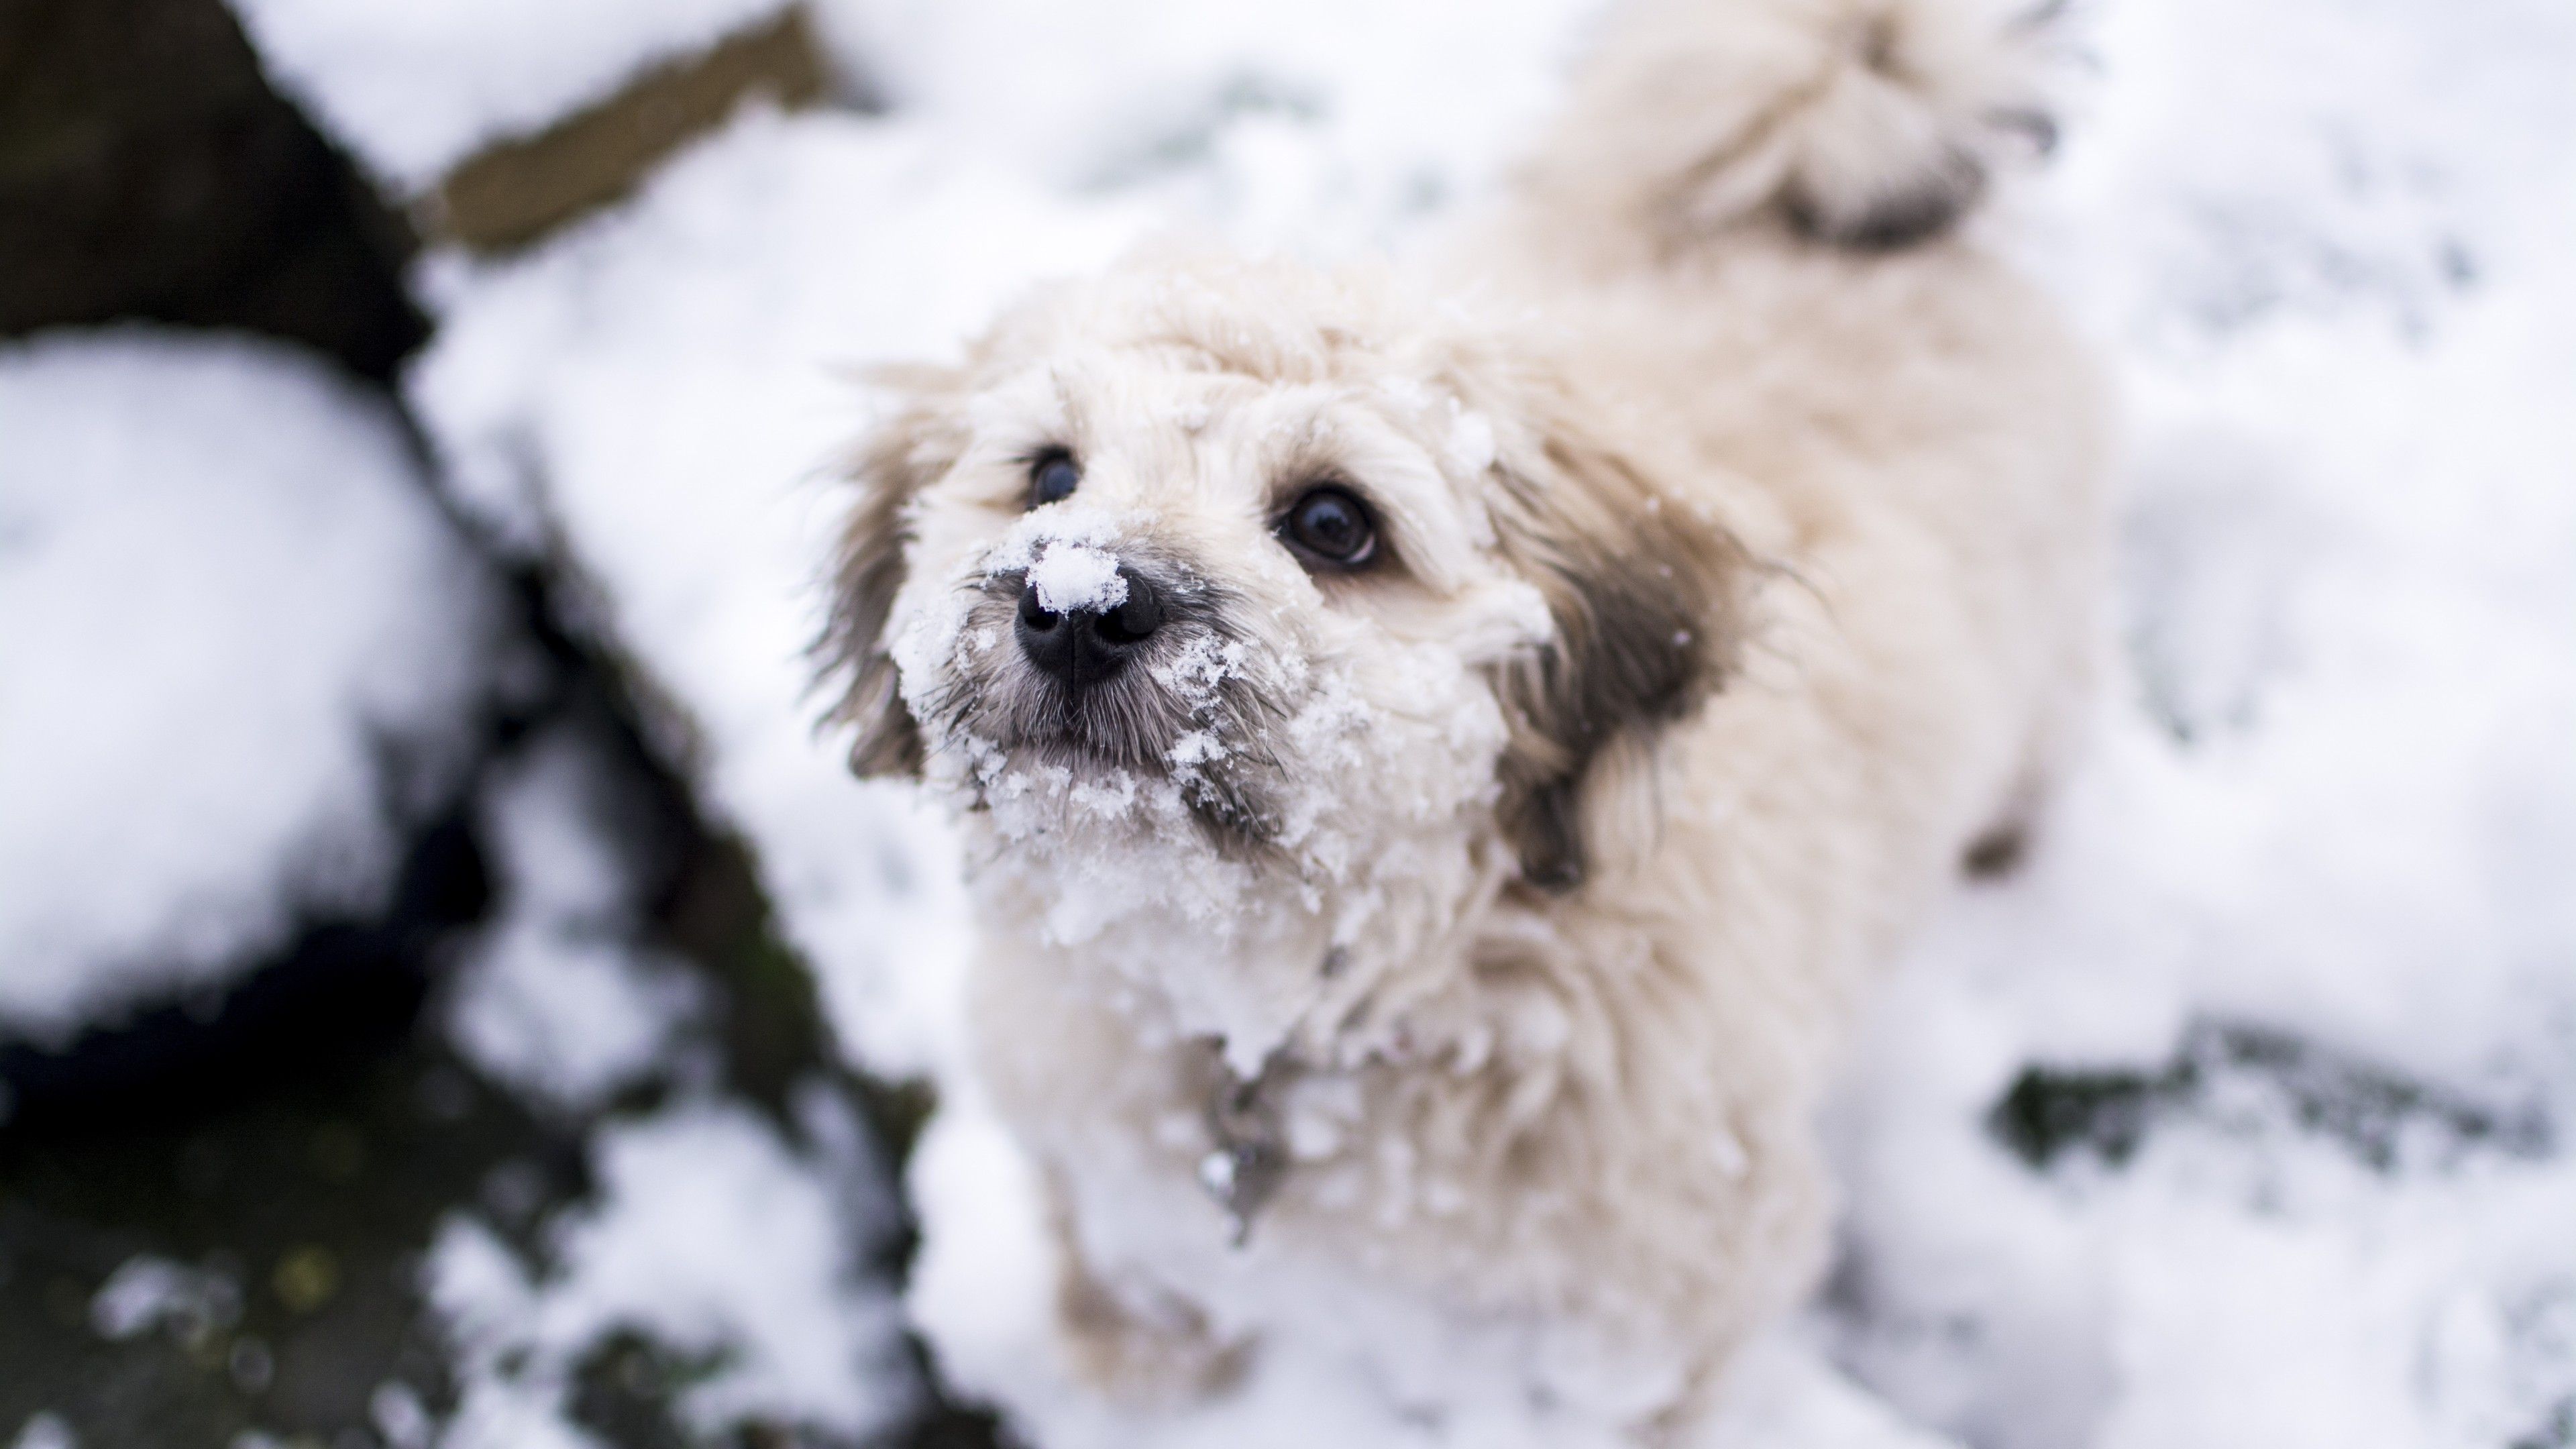 Wallpaper Cute dog, Puppy, Snow, Winter, 5K, Animals,. Wallpaper for iPhone, Android, Mobile and Desktop